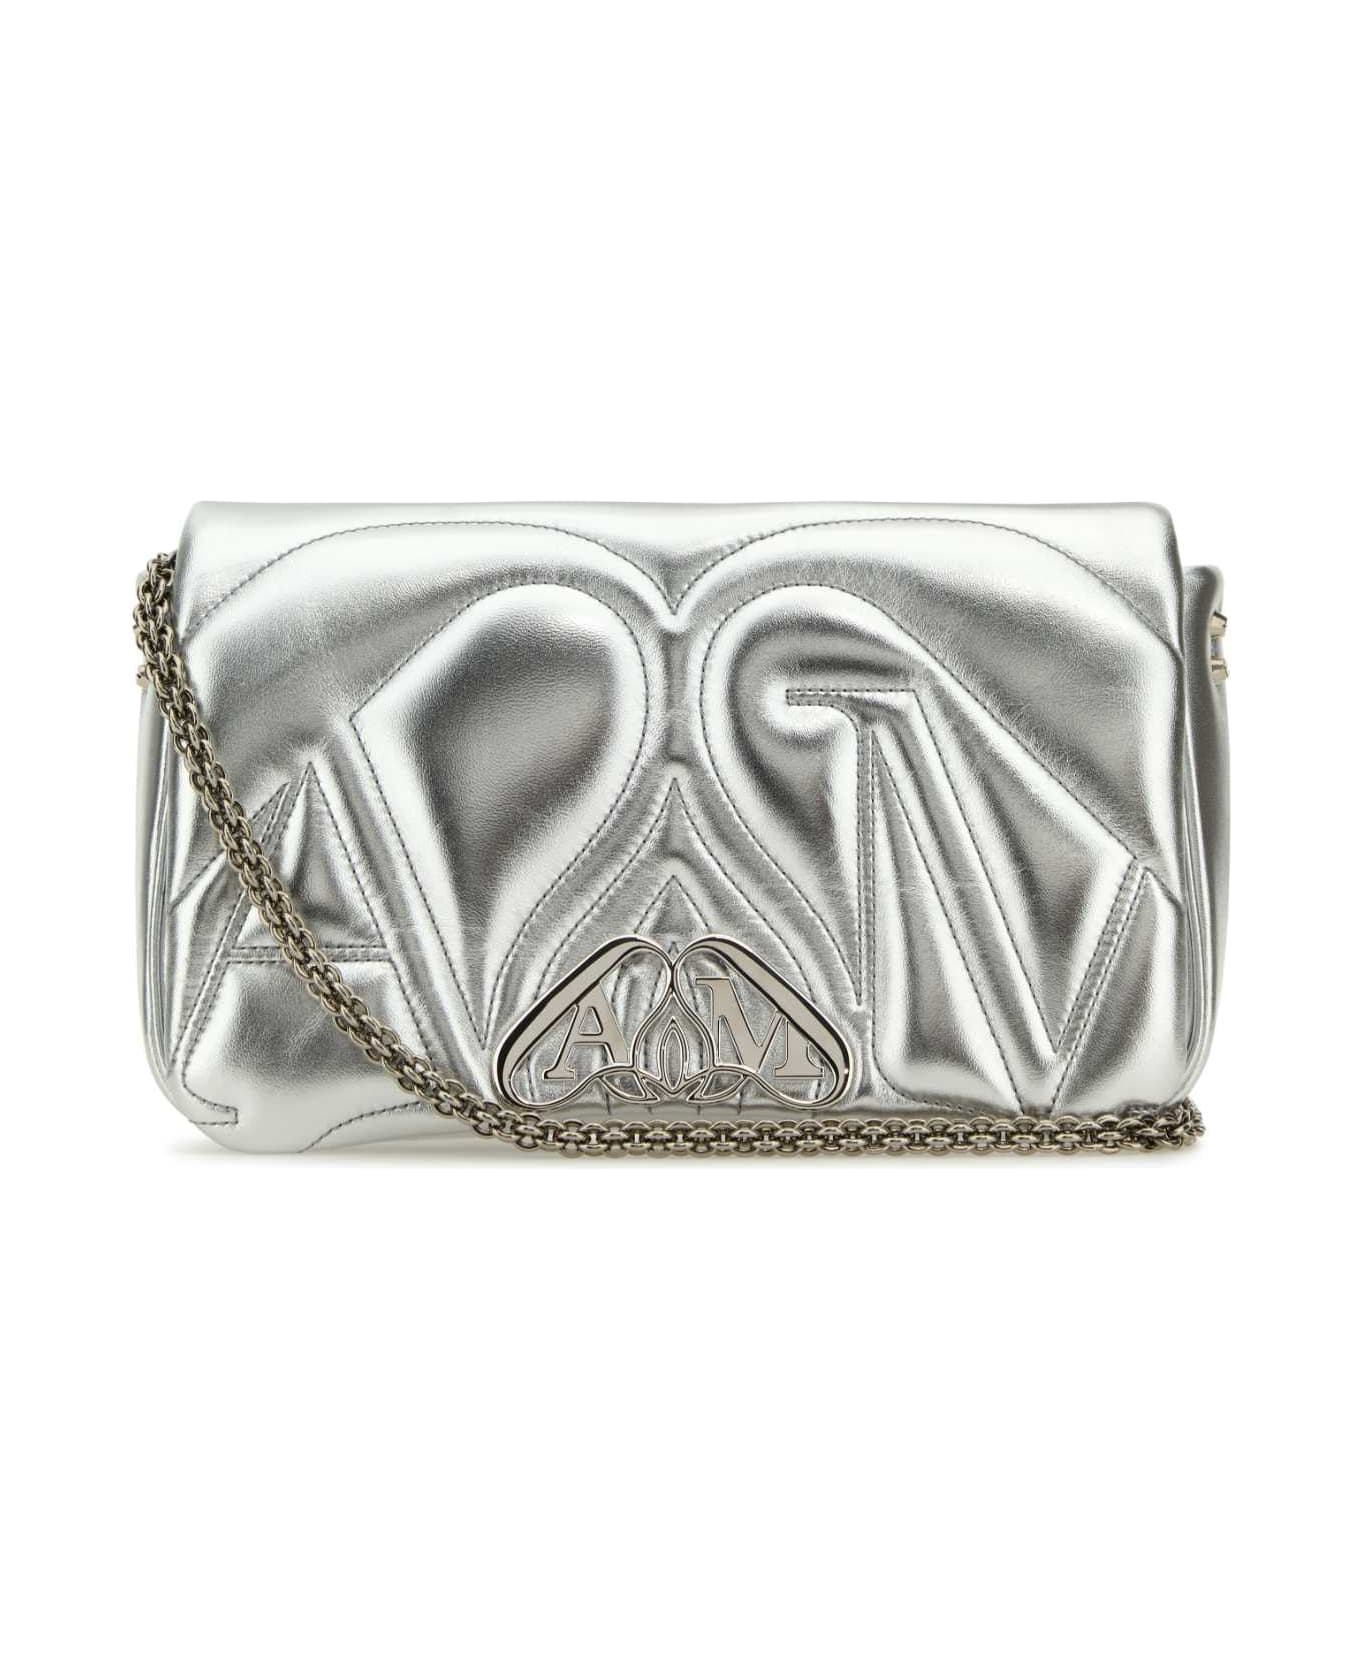 Alexander McQueen Silver Leather Small Seal Shoulder Bag - LIGHTSILVER ショルダーバッグ